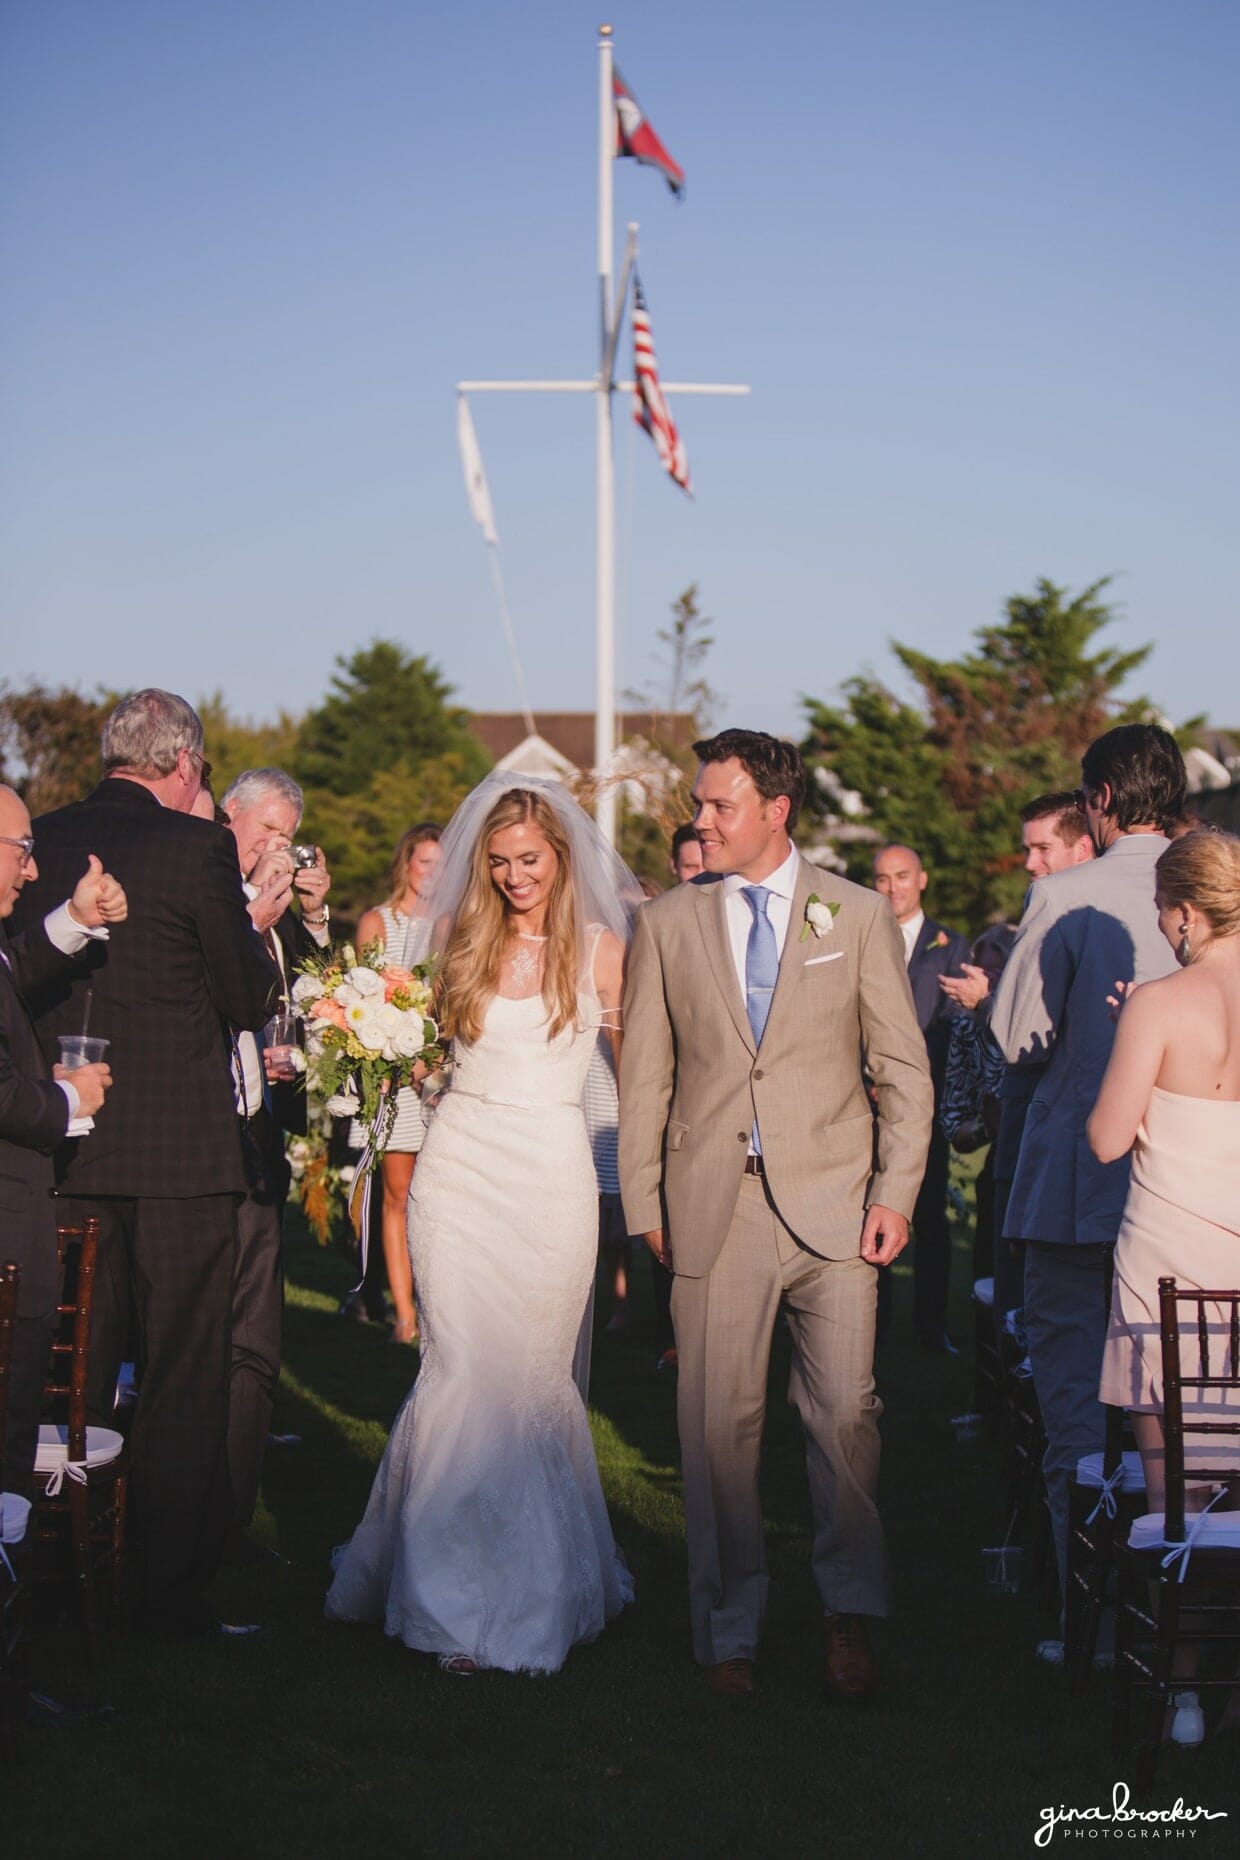 The bride and groom smile as they walk down the aisle together after their sunny outdoor wedding ceremony at the Westmoor Club in Nantucket, Massachusetts